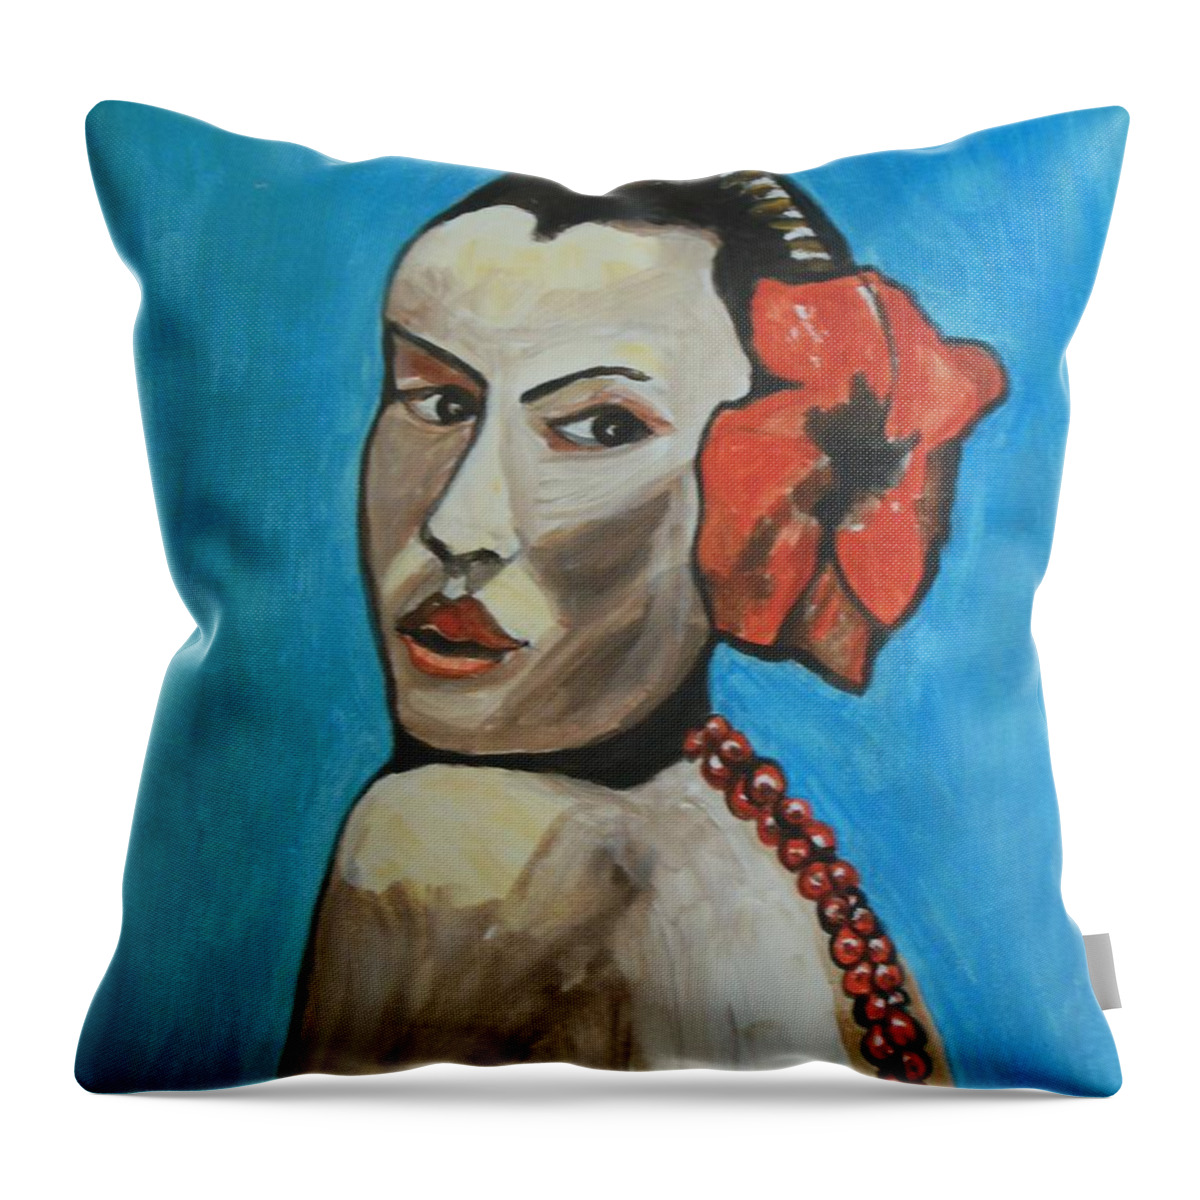 Tahiti Flower Girl Throw Pillow featuring the painting Tahiti Flower Girl by Esther Newman-Cohen